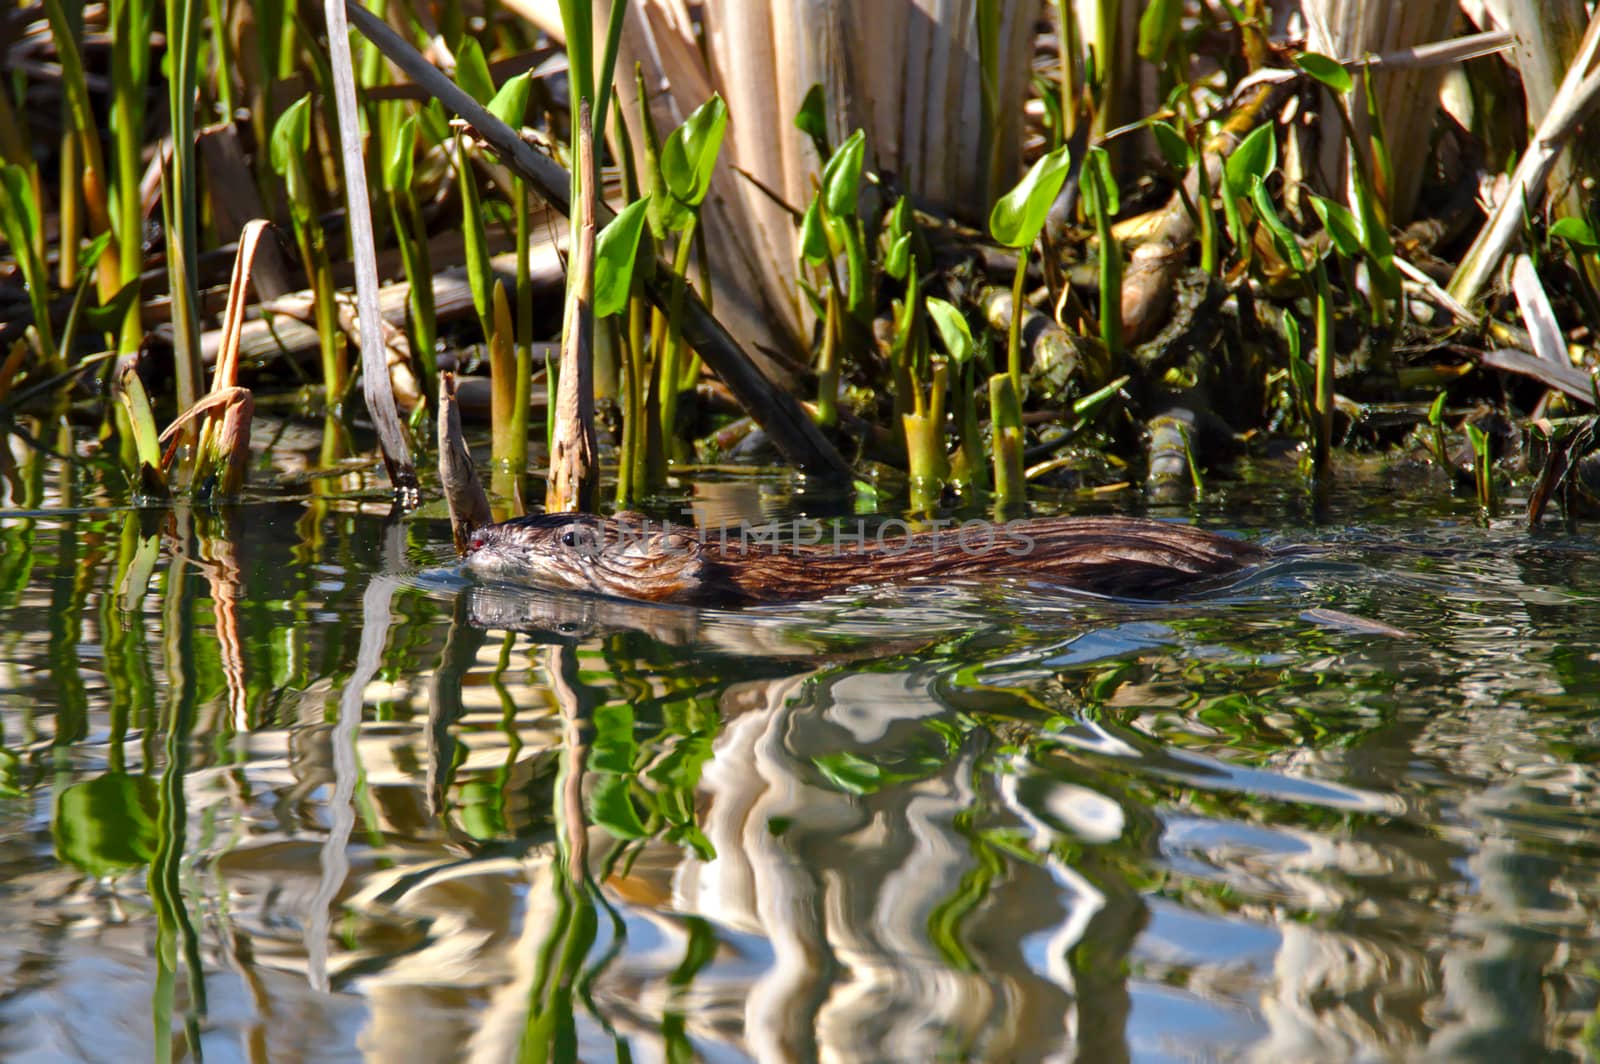 Muskrat swimming on water, head and top half of the body above surface. Photo taken in spring, fresh leaves and plants on the background.